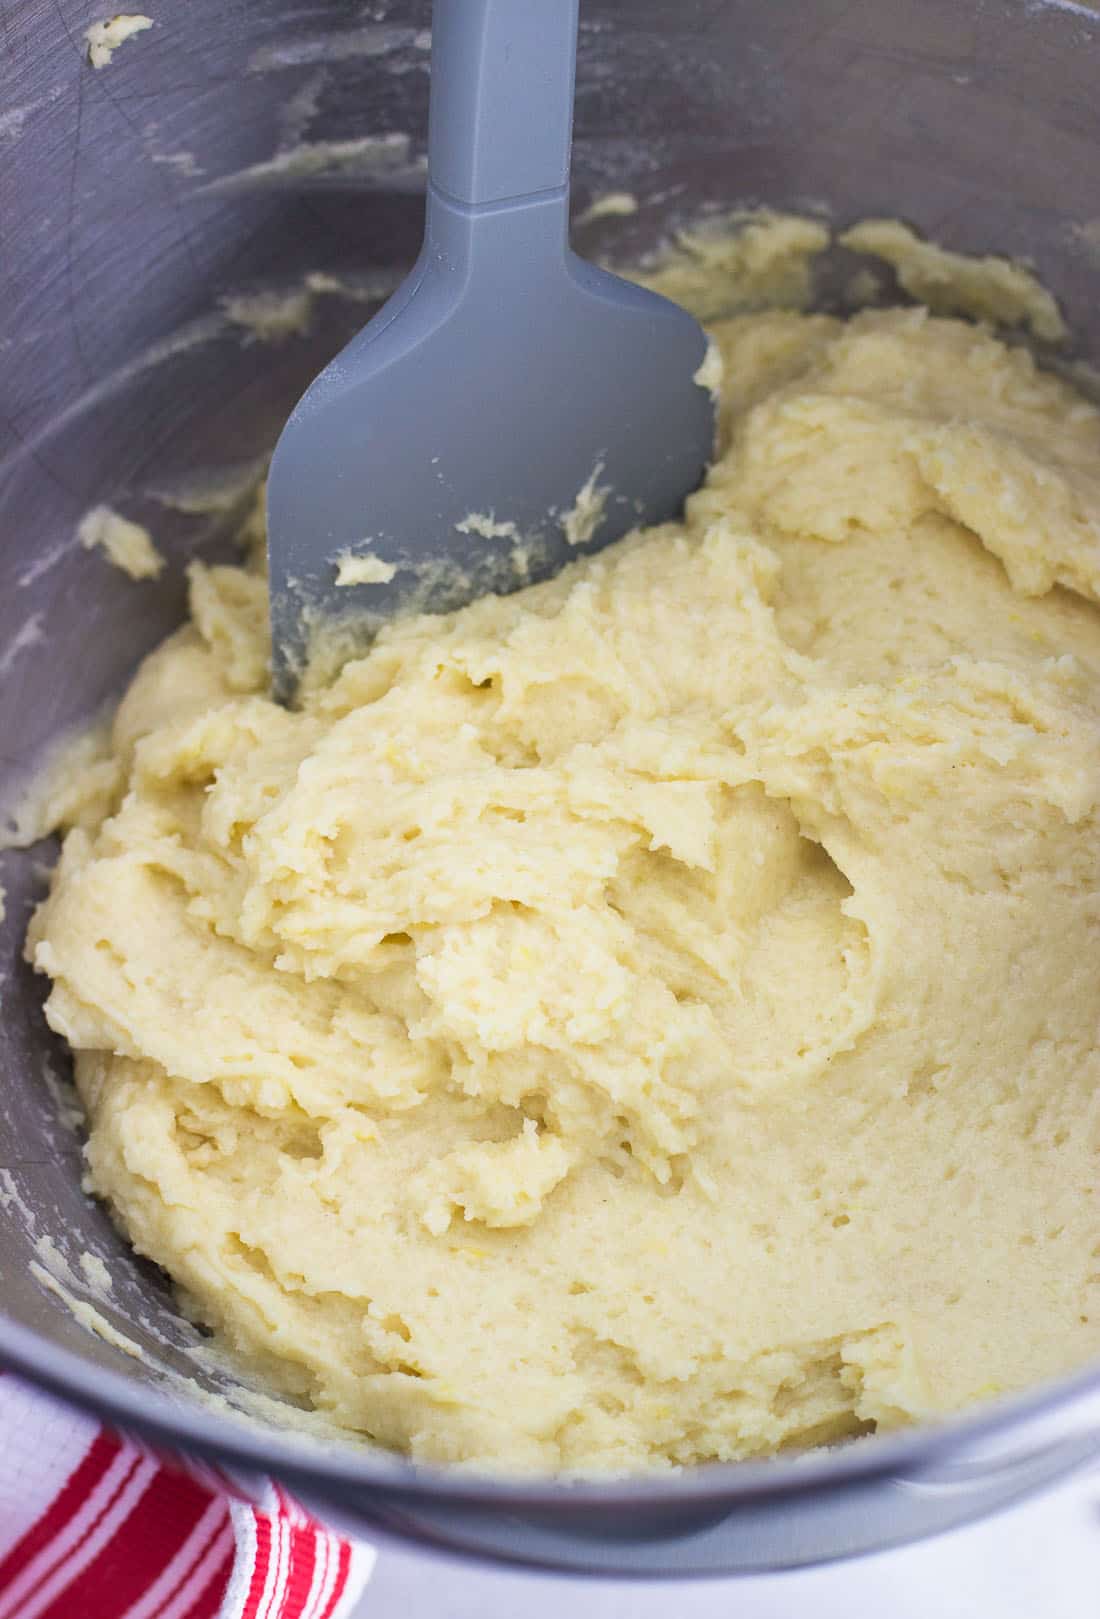 Muffin batter in a metal mixing bowl with a spatula